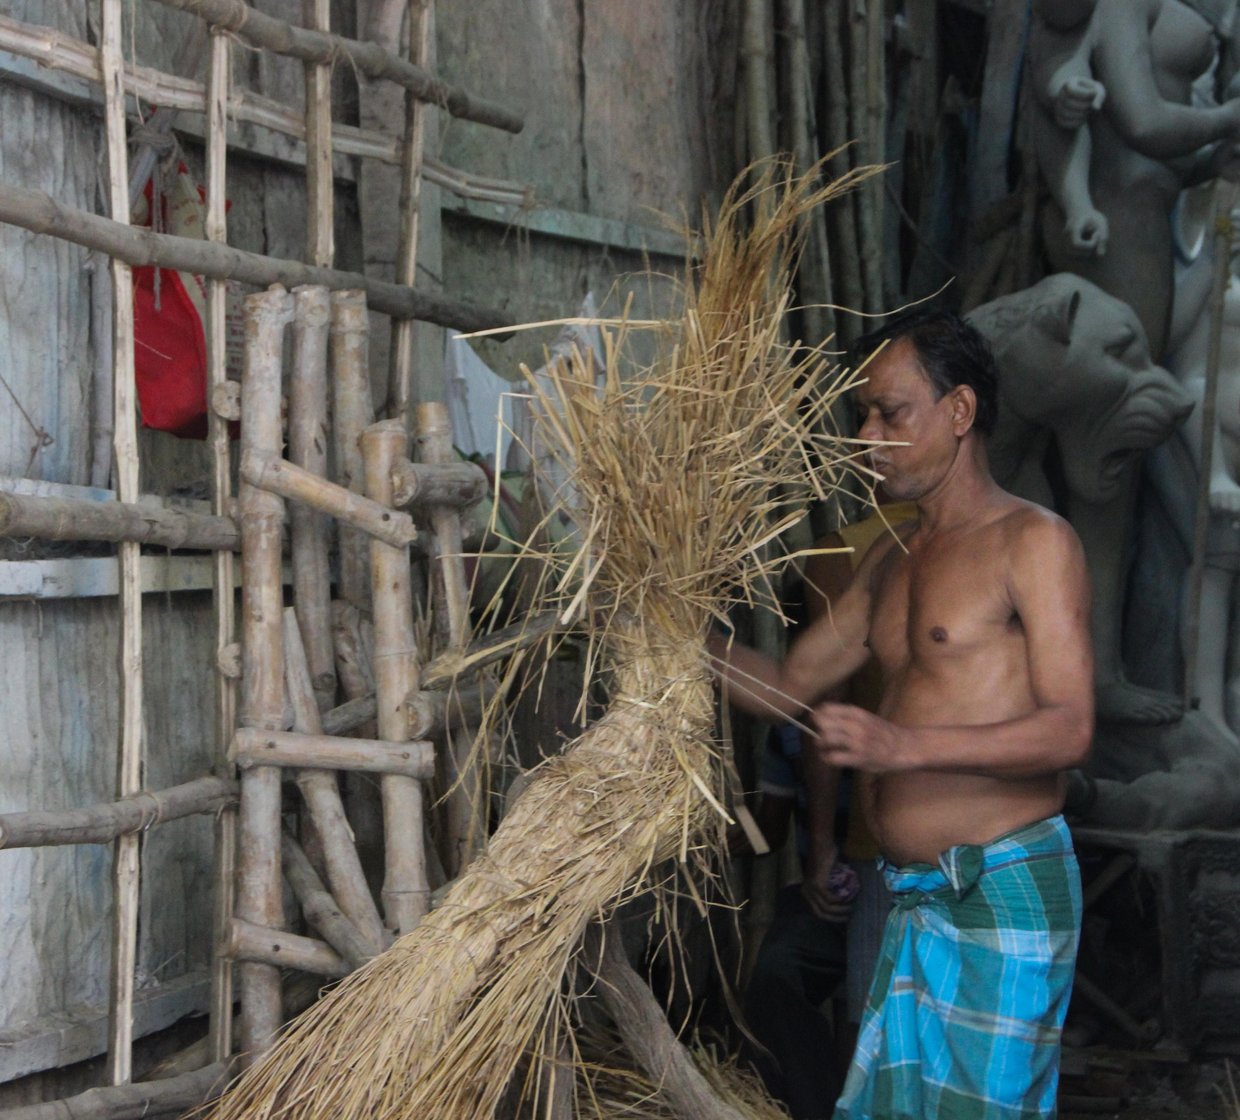 Once the bamboo structure is ready, straw is methodically bound together to give shape to an idol; the raw materials for this come from the nearby Bagbazar market